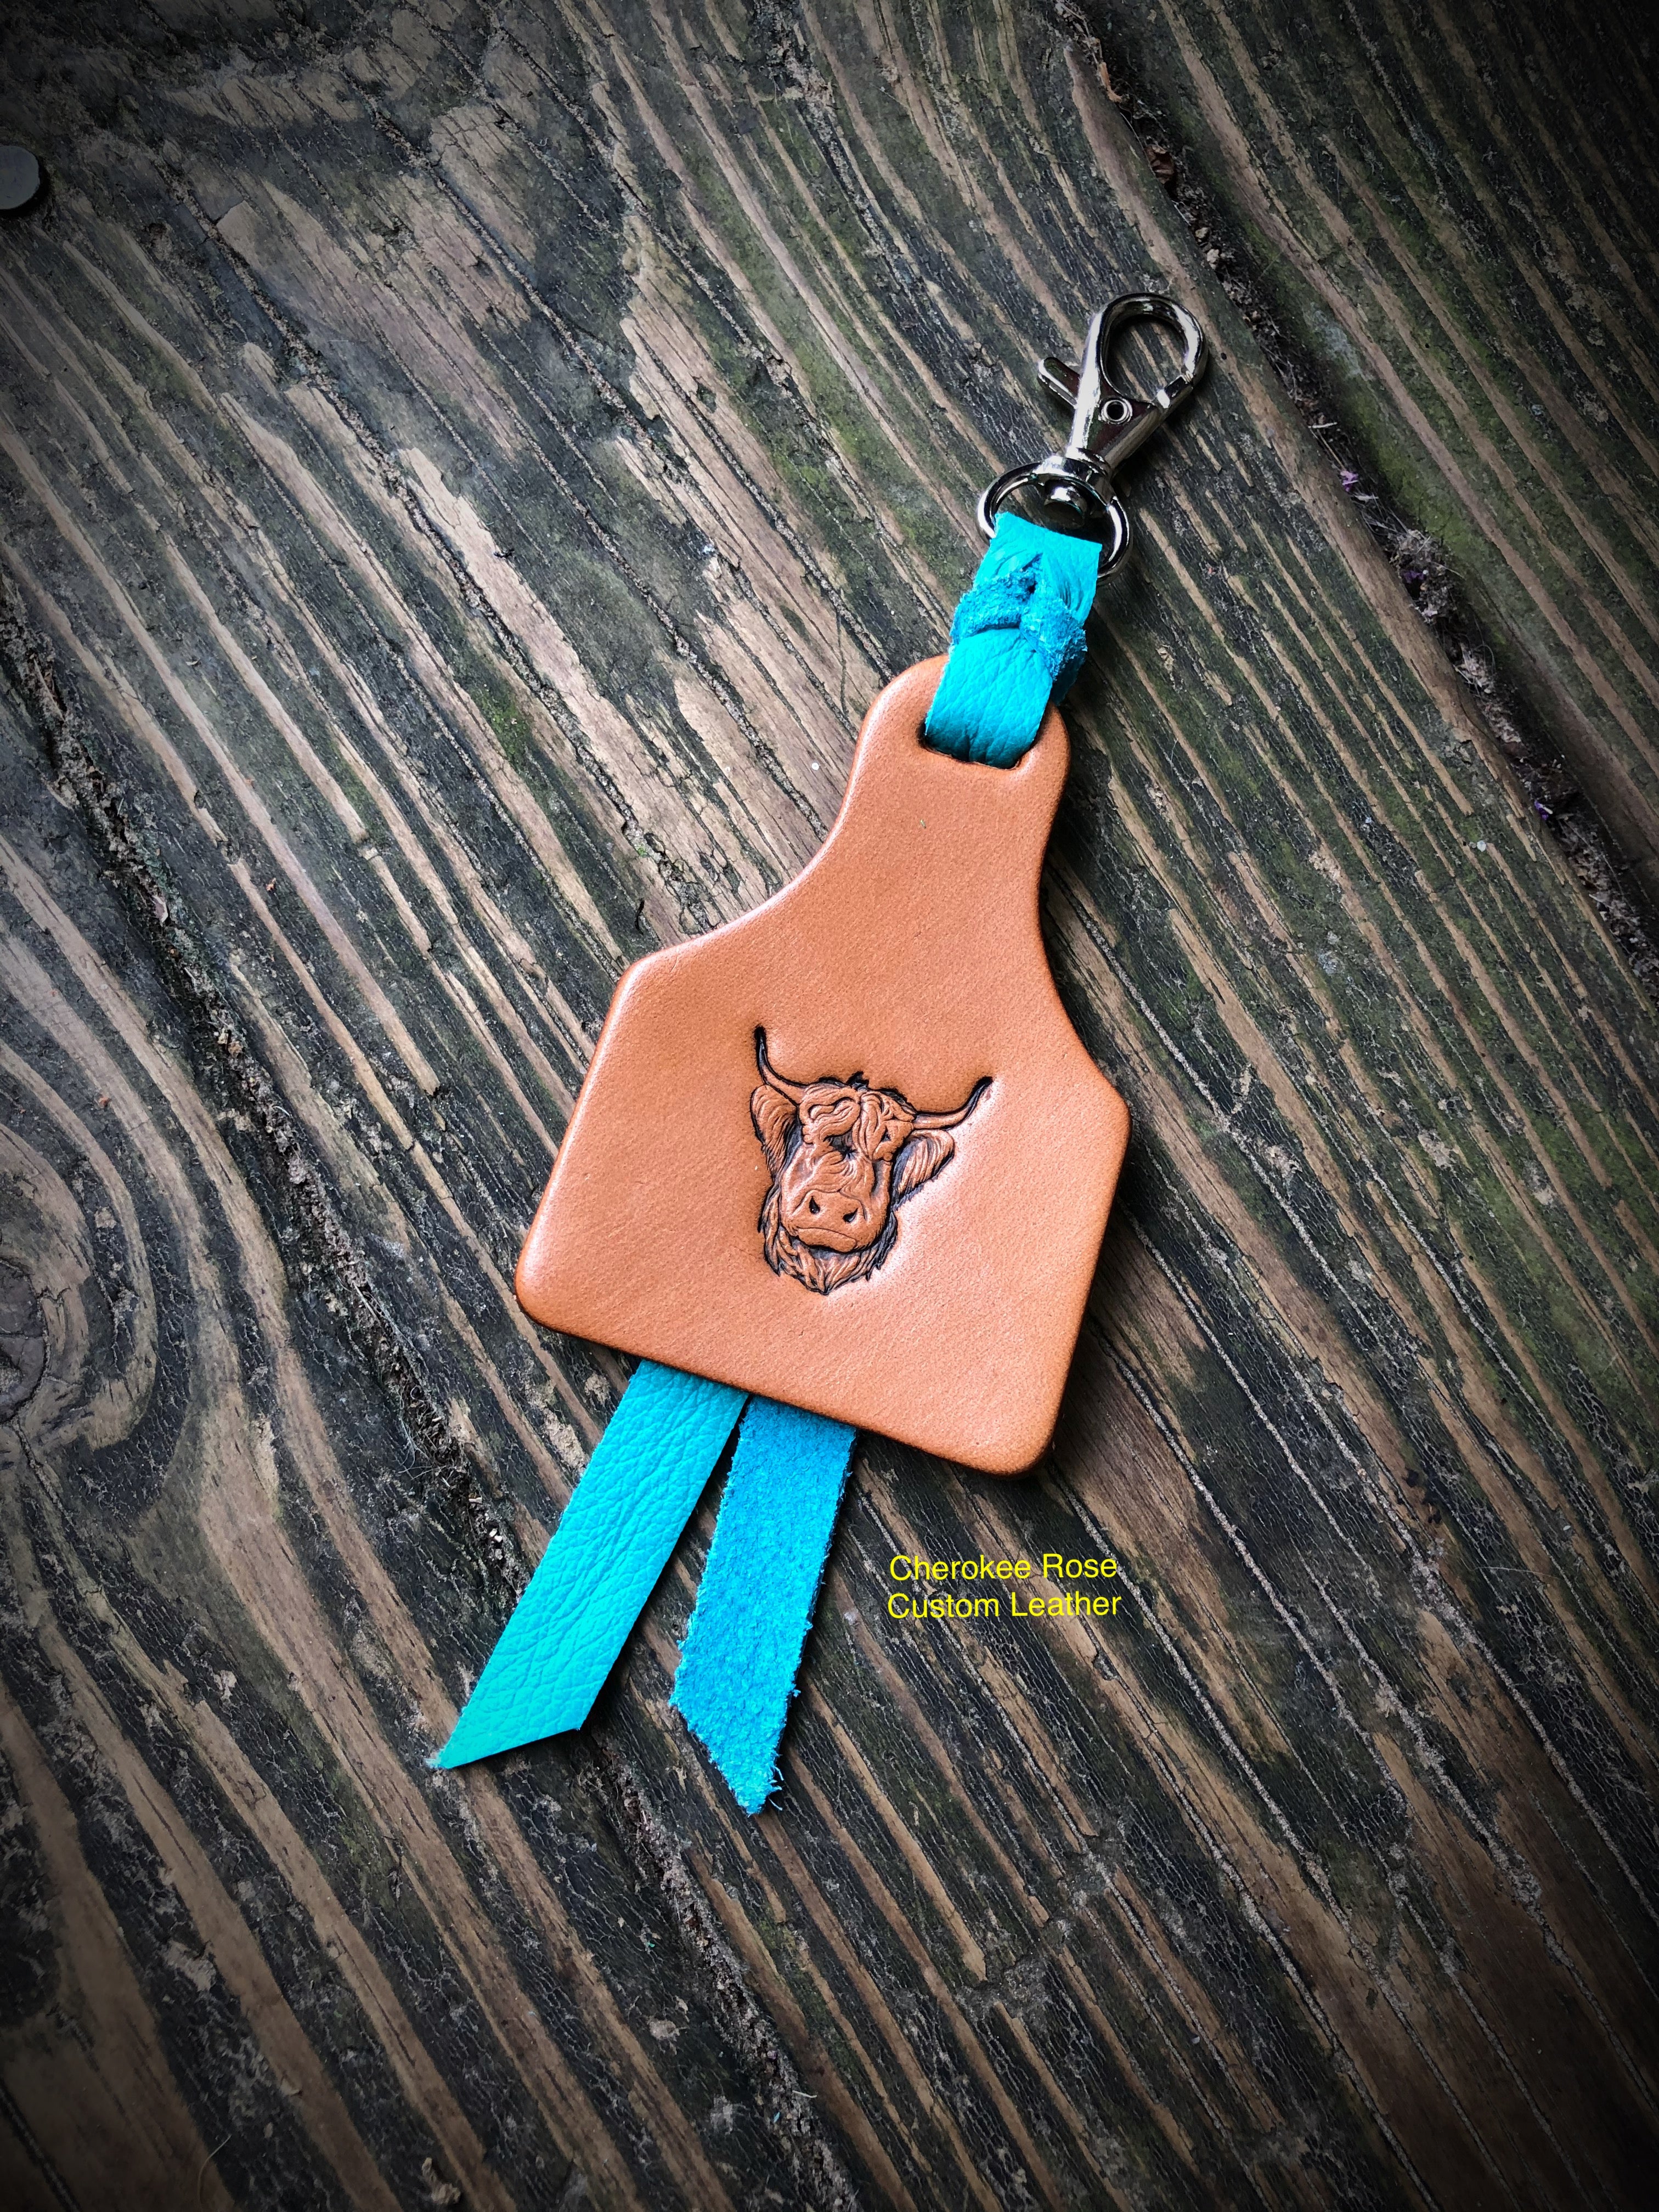 Handmade Cow Leather Bag Charms Bag Accessories Key Chains 